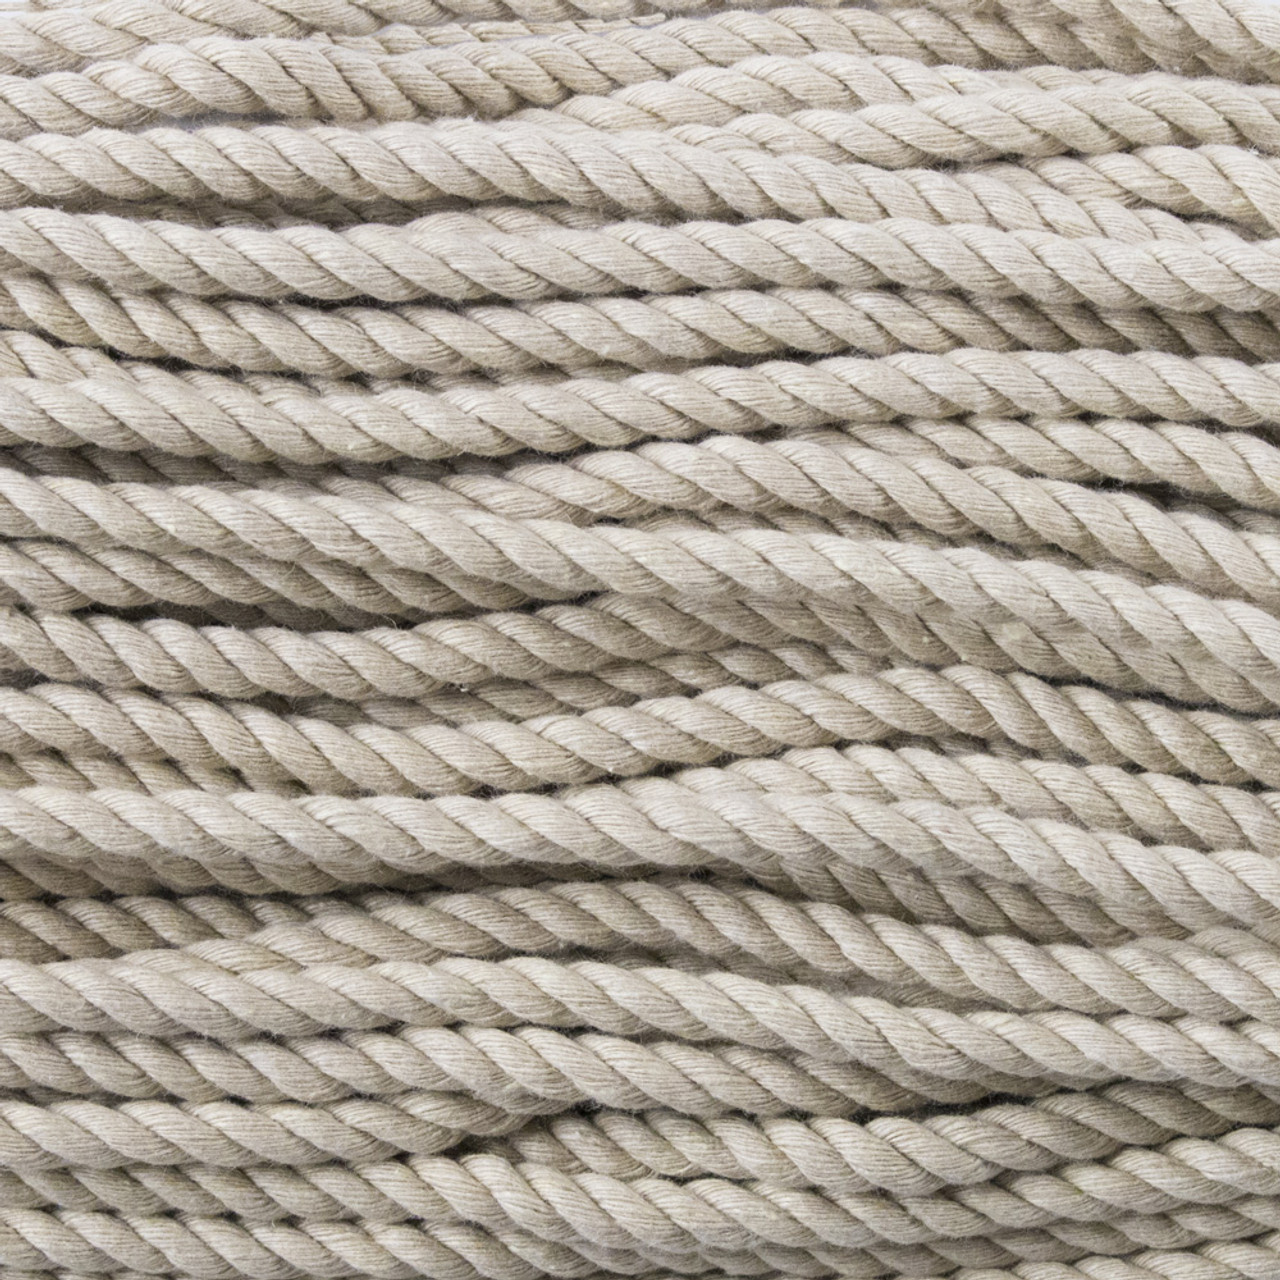  Twisted Natural Cotton Rope - 1/4 Inch - Solid Colors